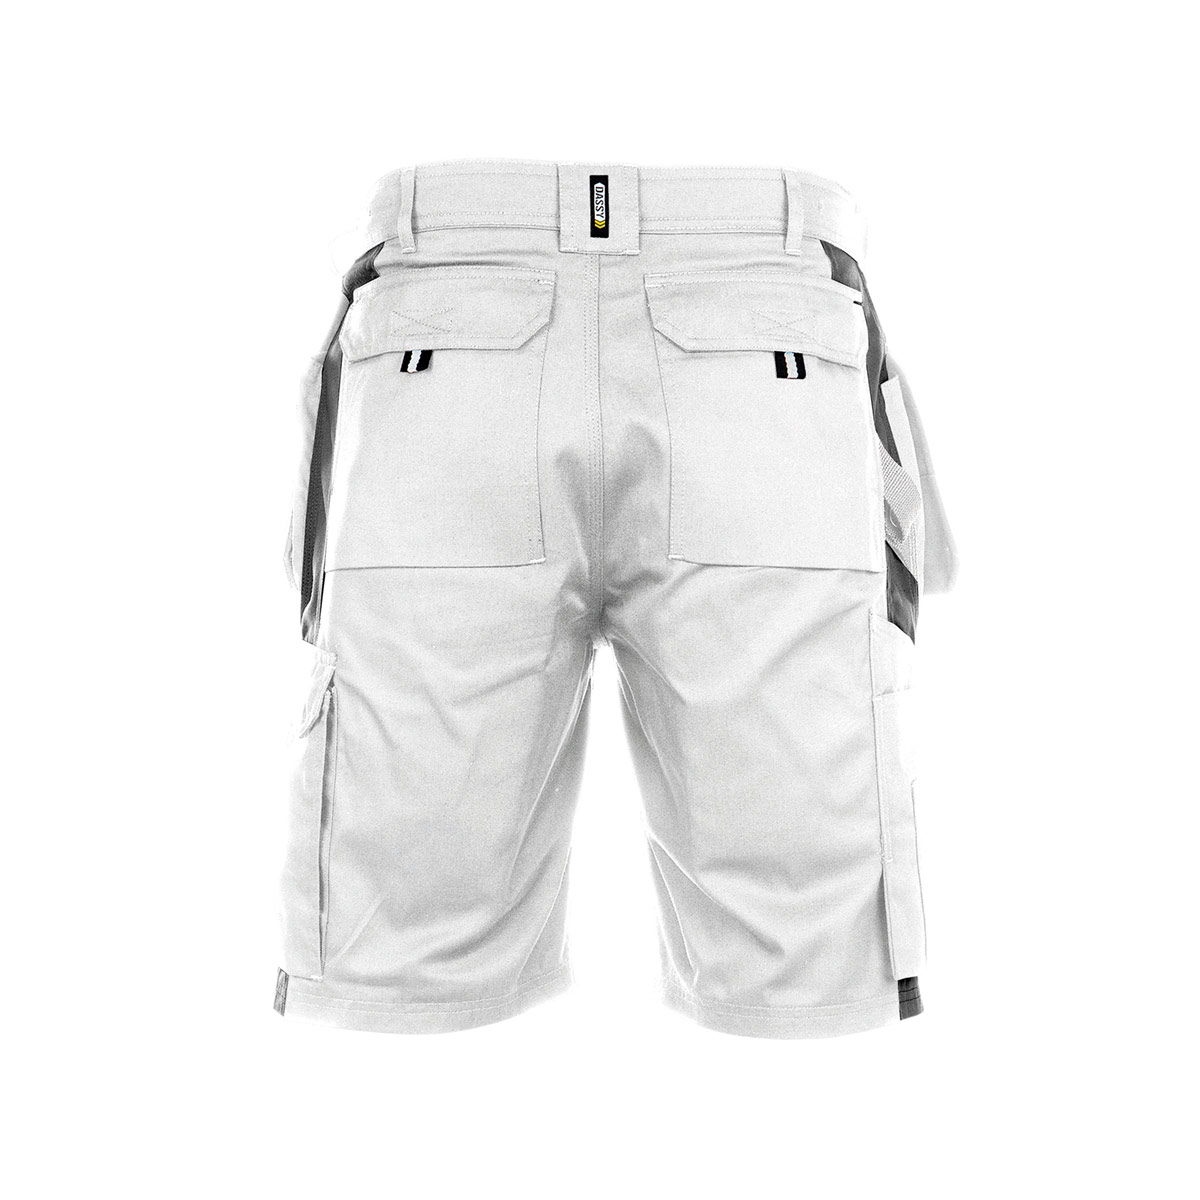 DASSY Monza two-tone work shorts with holster pockets